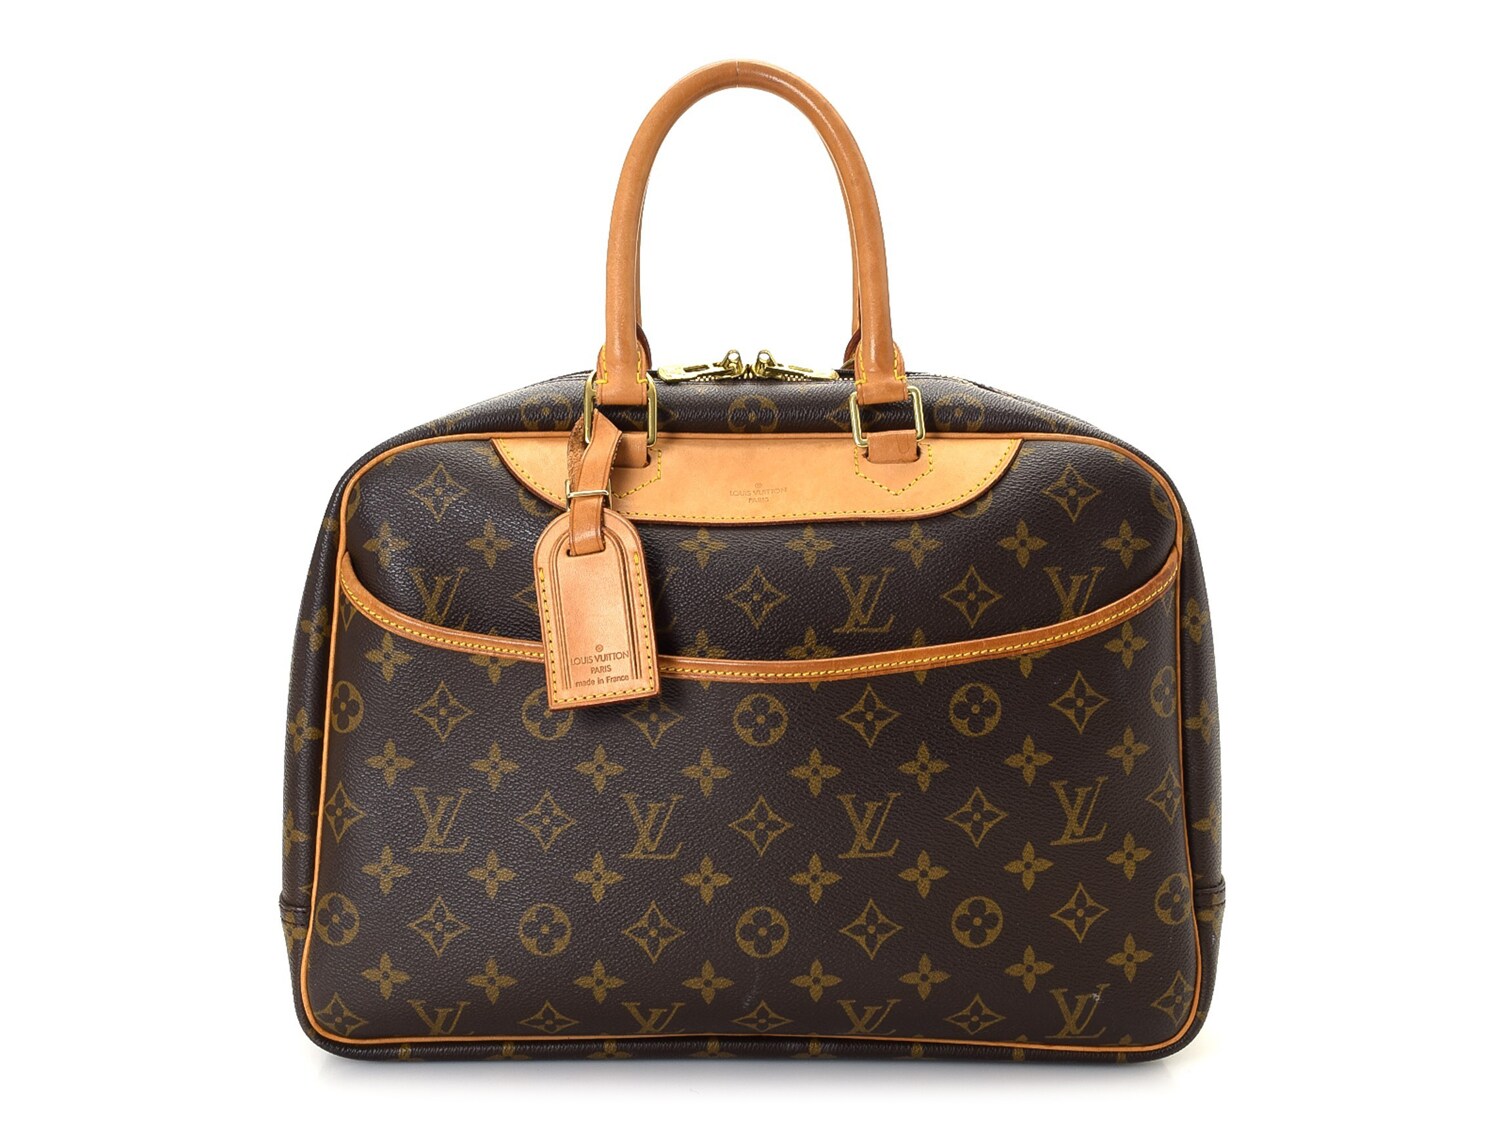 Authentic Louis Vuitton Deauville Hand Bag for Sale in Fort